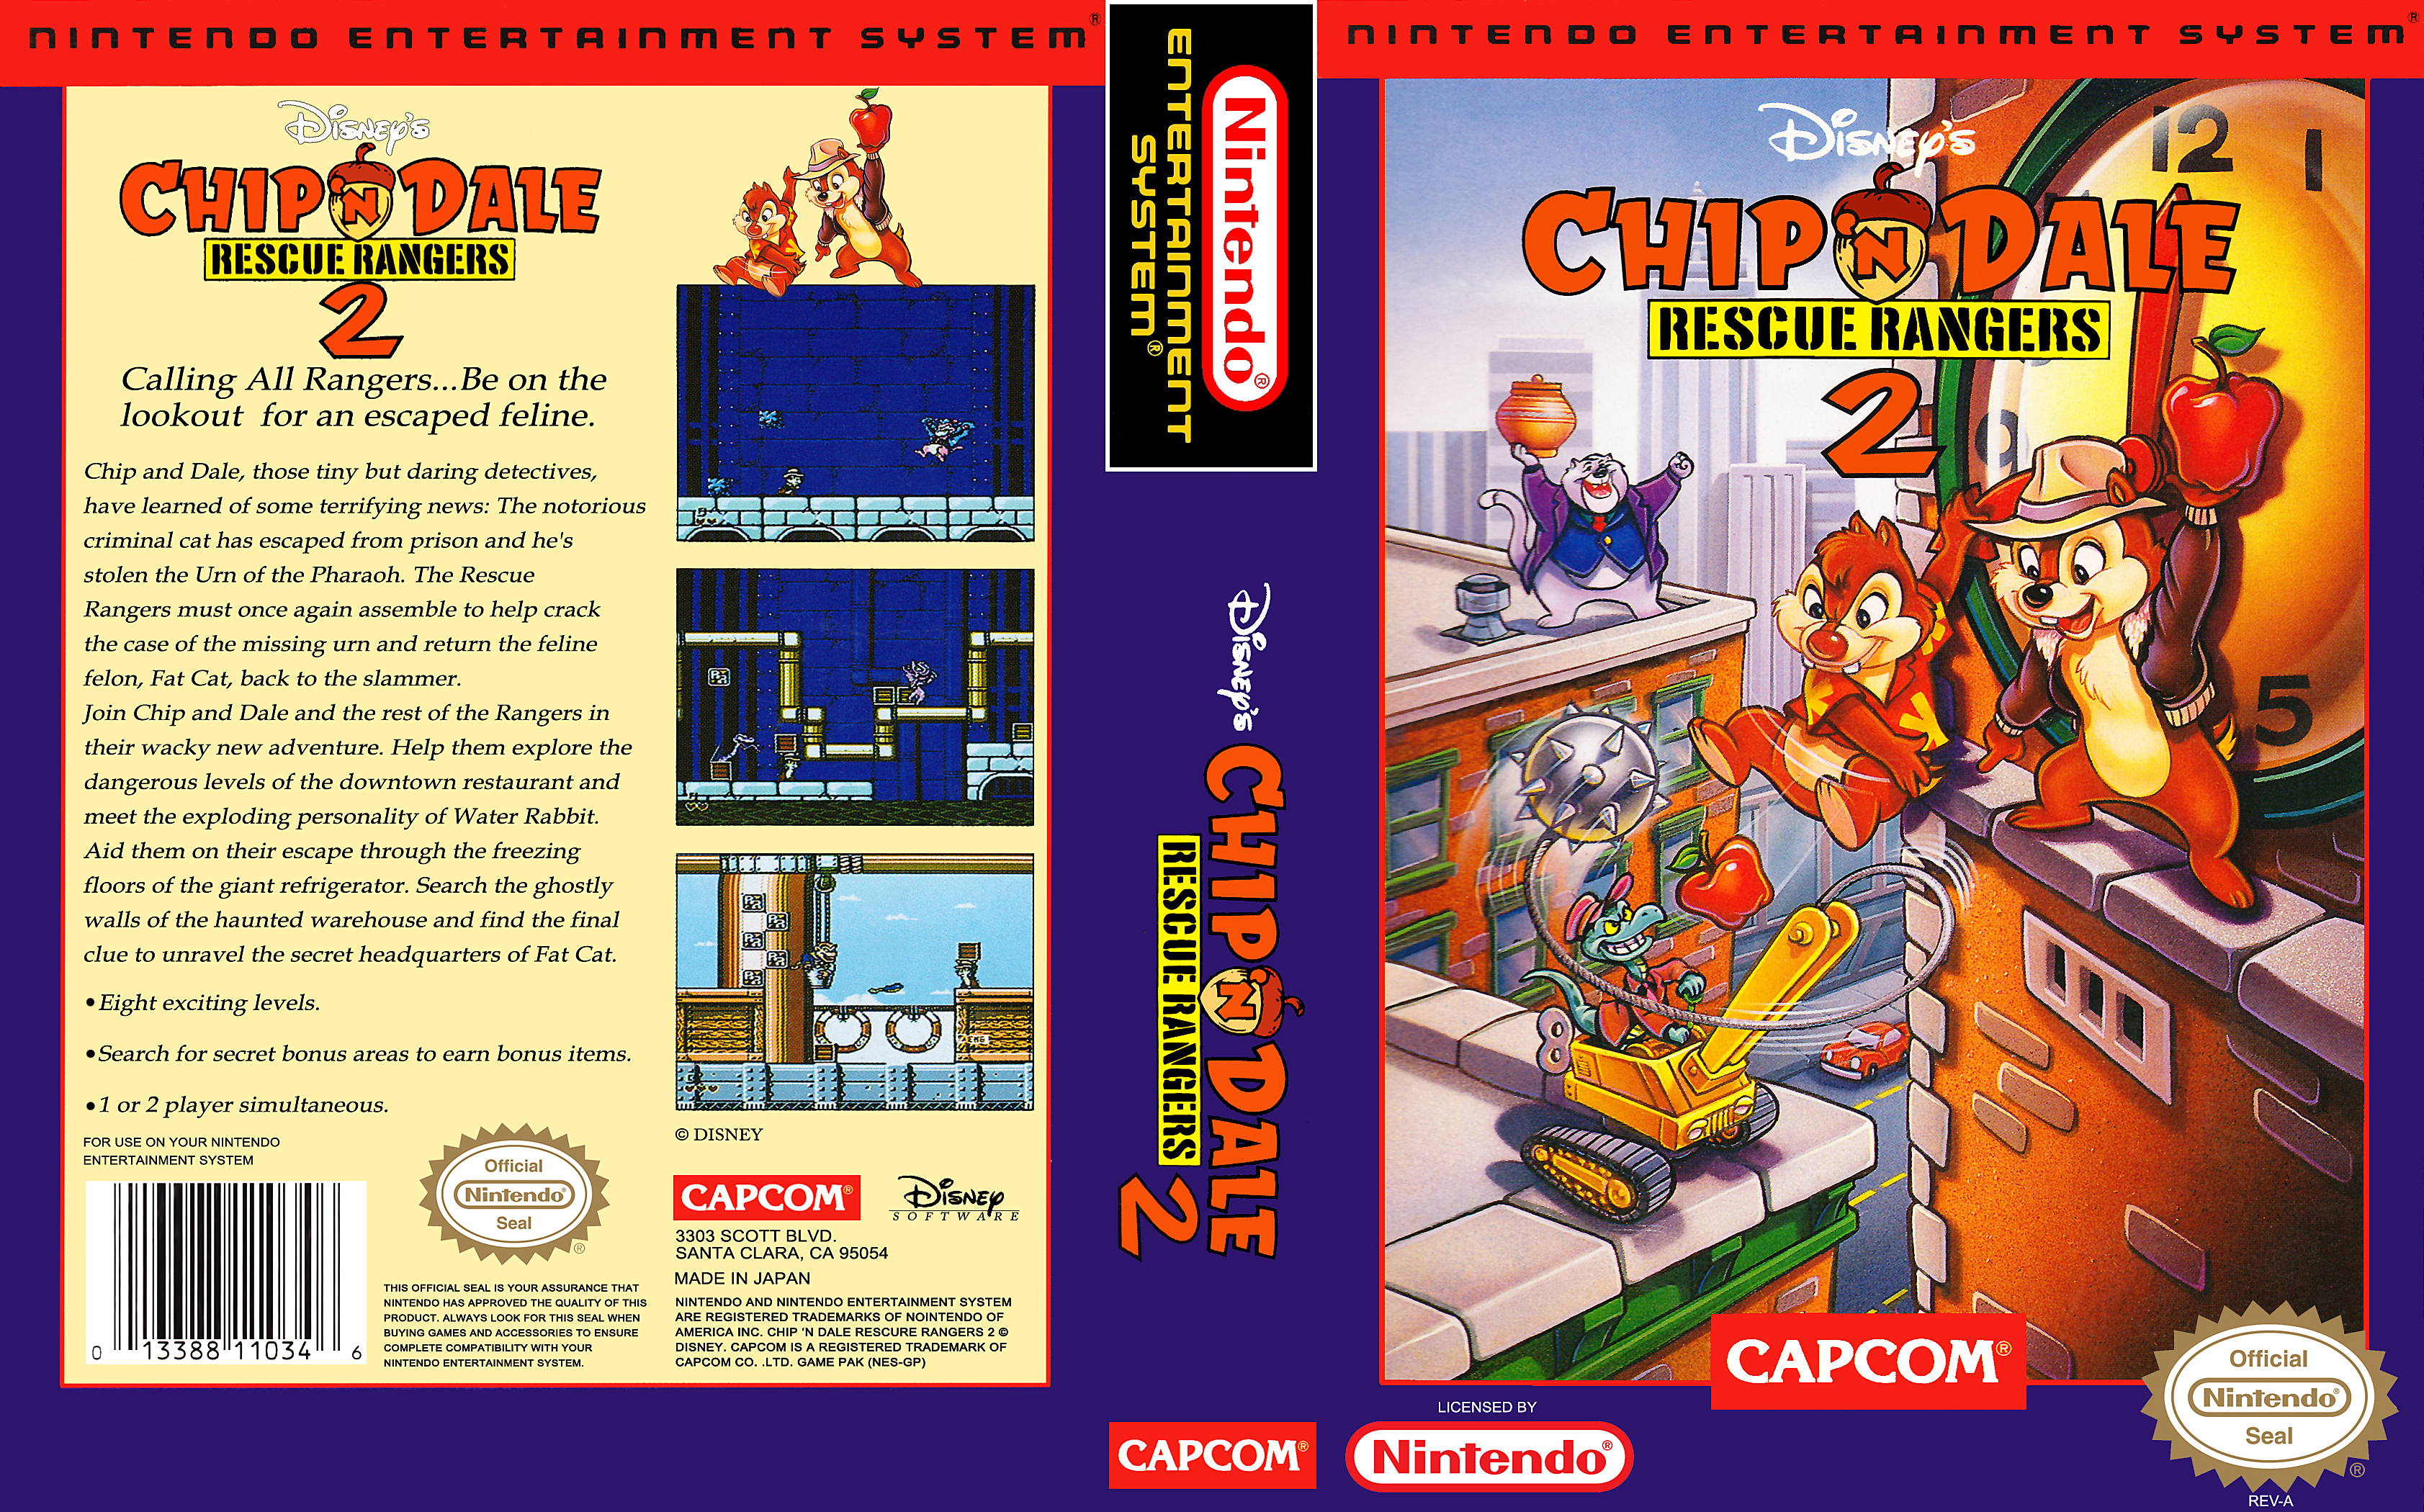 Chip and dale 2. Chip 'n Dale Rescue Rangers 2 NES. Обложки игры для нес чип и Дейл 2. Chip Dale 2 NES обложка. Чип и Дейл 2nes картридж.